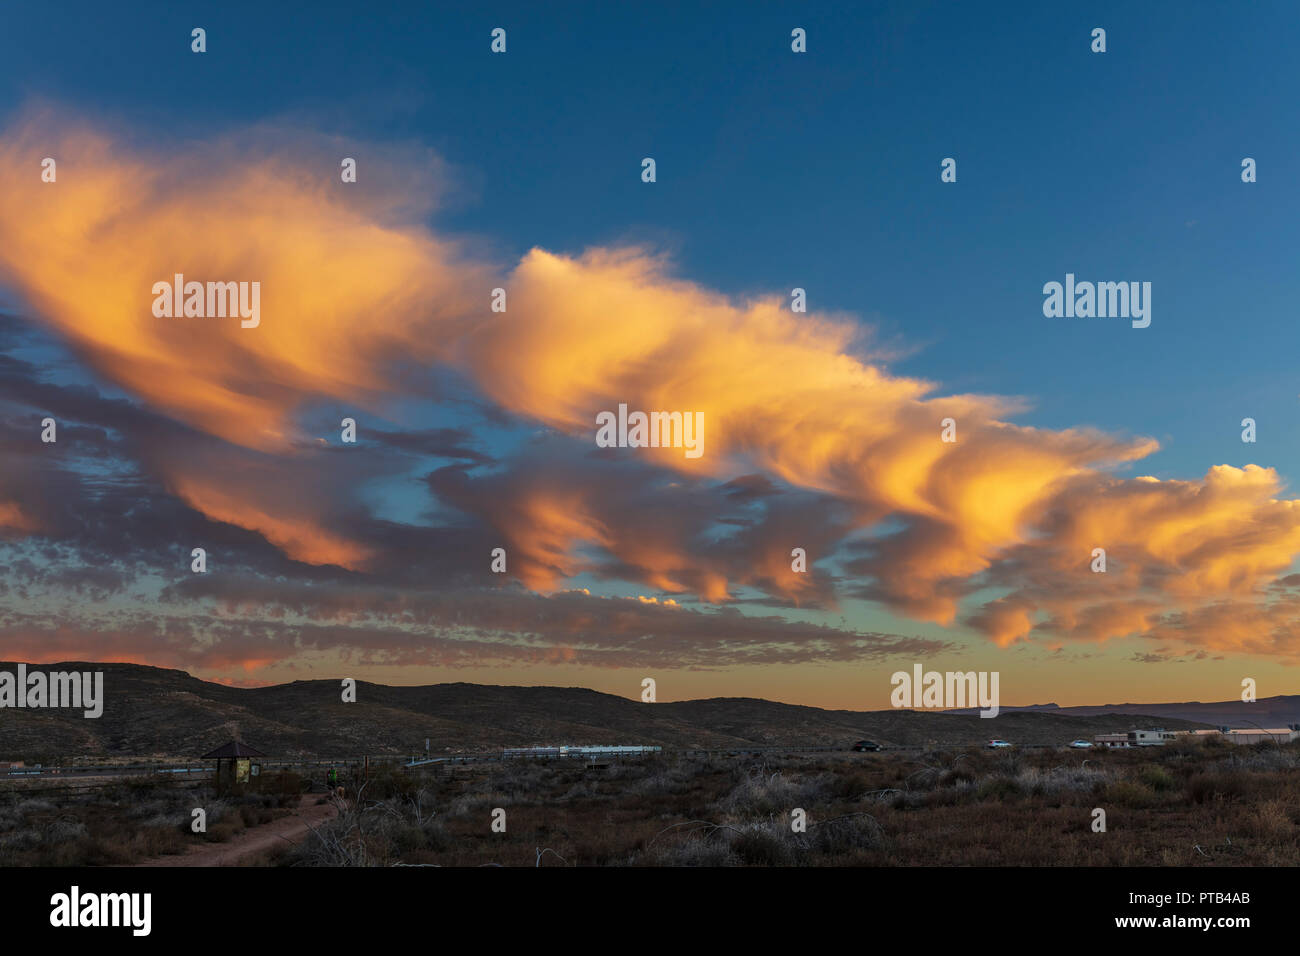 Cloud formations at sunset off Interstate 15 near Hurricane, Utah. Stock Photo